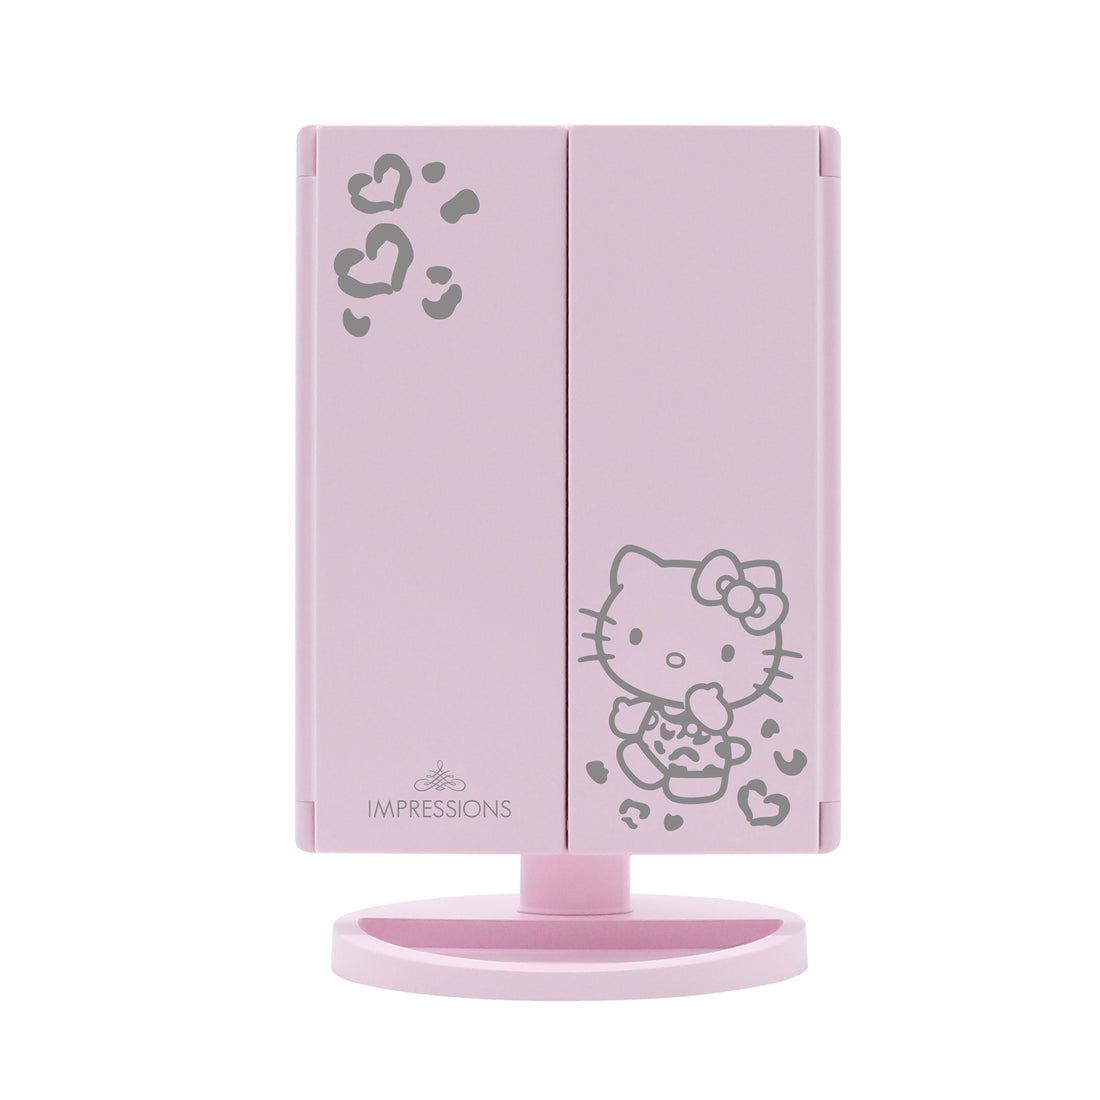 IMPRESSIONS VANITY X HELLO KITTY - TRIFOLD LED MAKEUP MIRROR WITH MAGNIFICATION